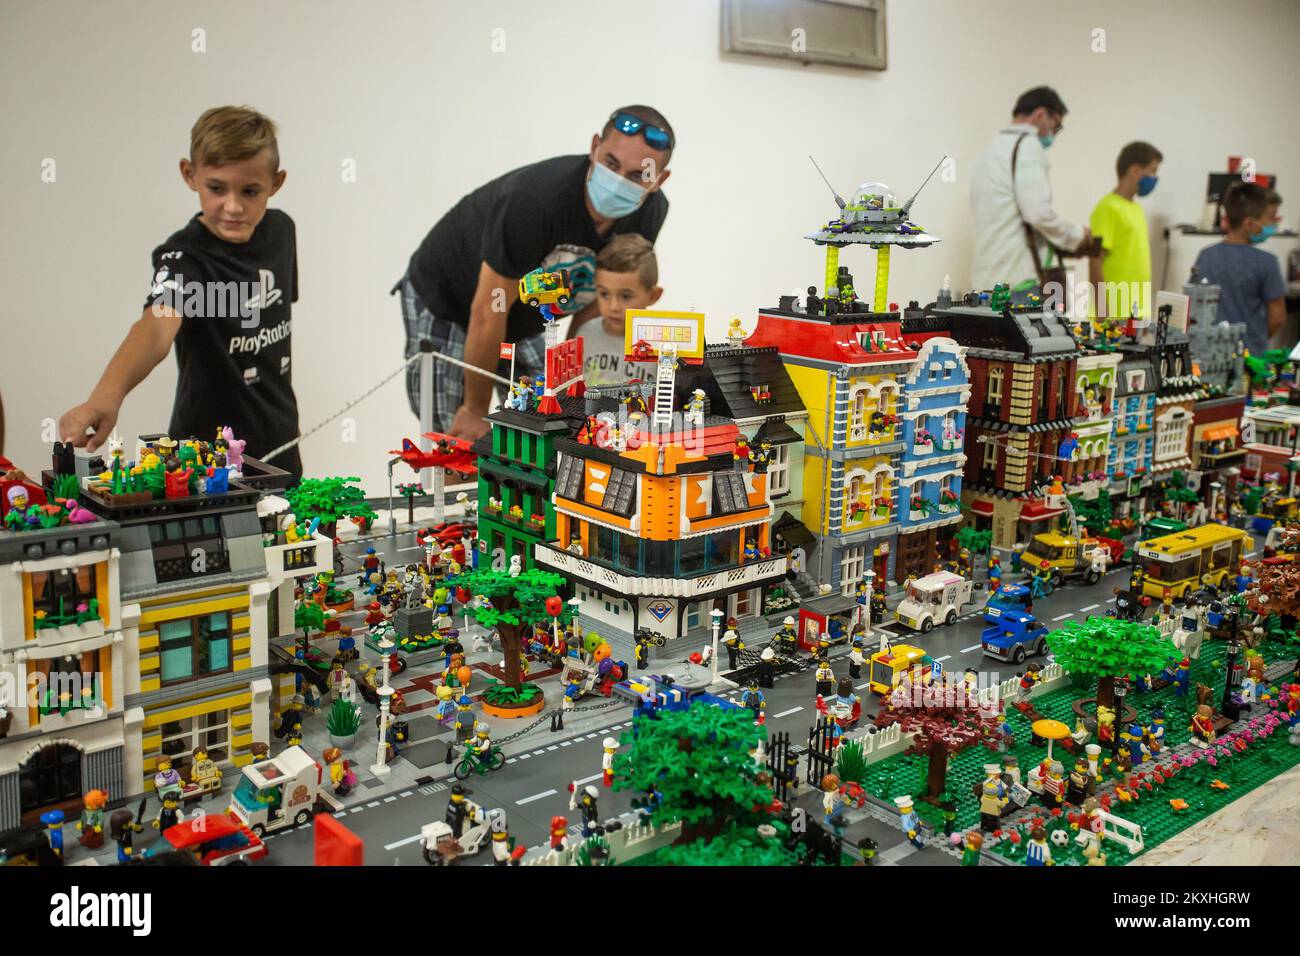 People watch the exhibits during a LEGO exhibition in Djakovo, Croatia,  Sept. 05, 2020. Photo: Davor Javorovic/PIXSELL Stock Photo - Alamy